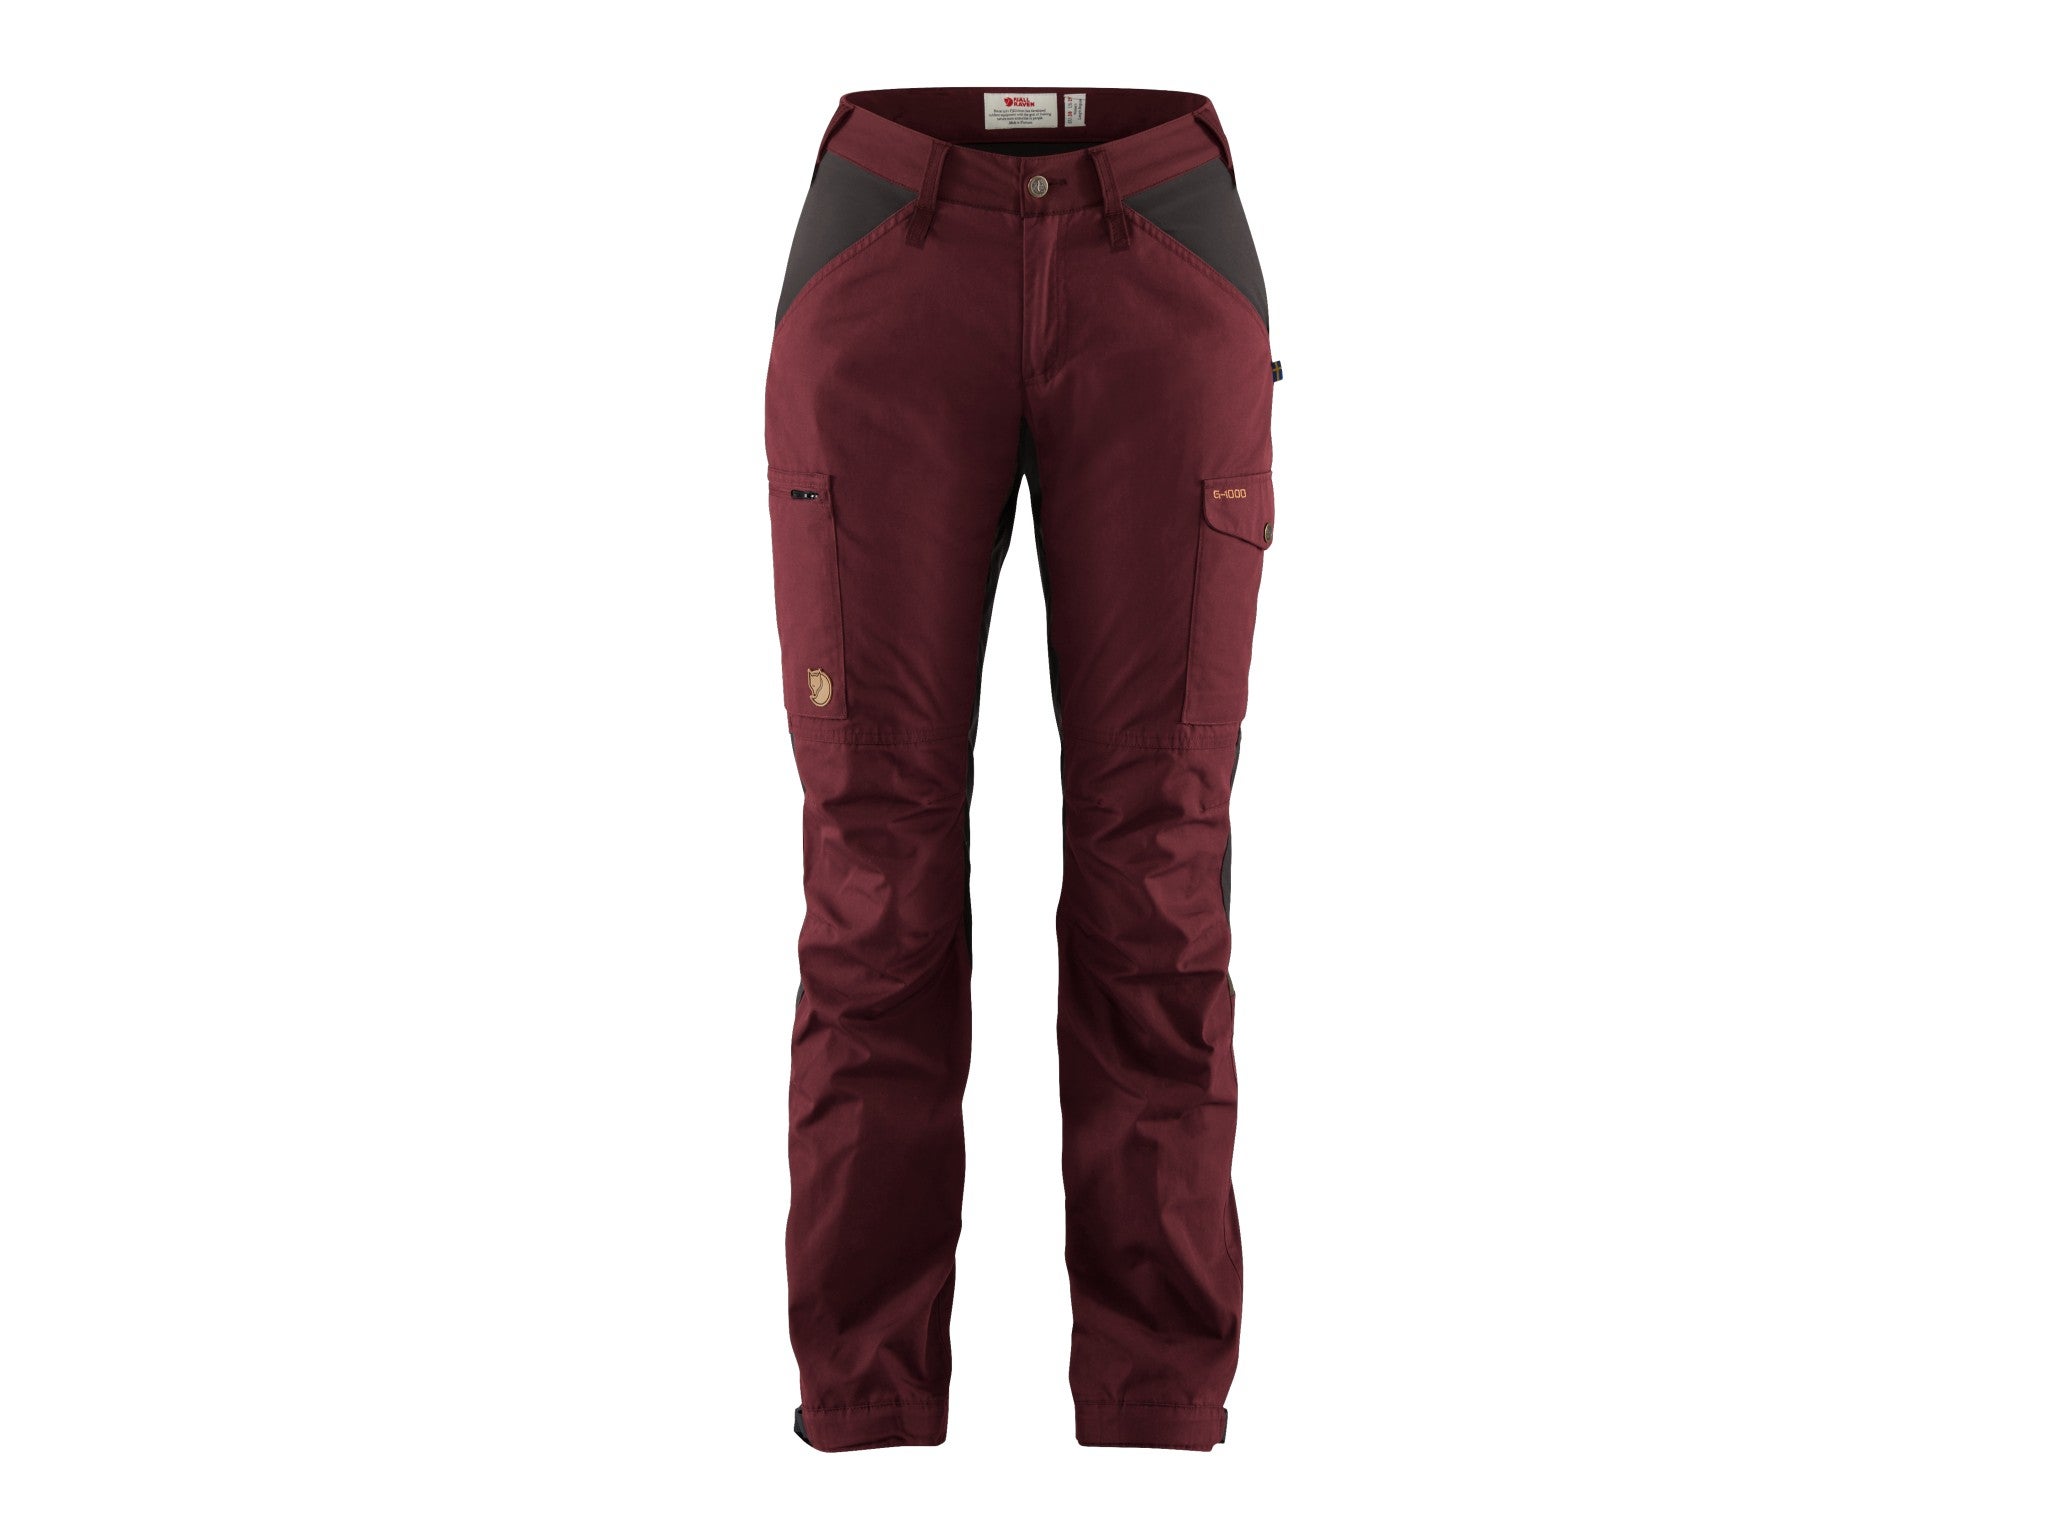 Fjallraven kaipak trousers curved W indybest.jpg